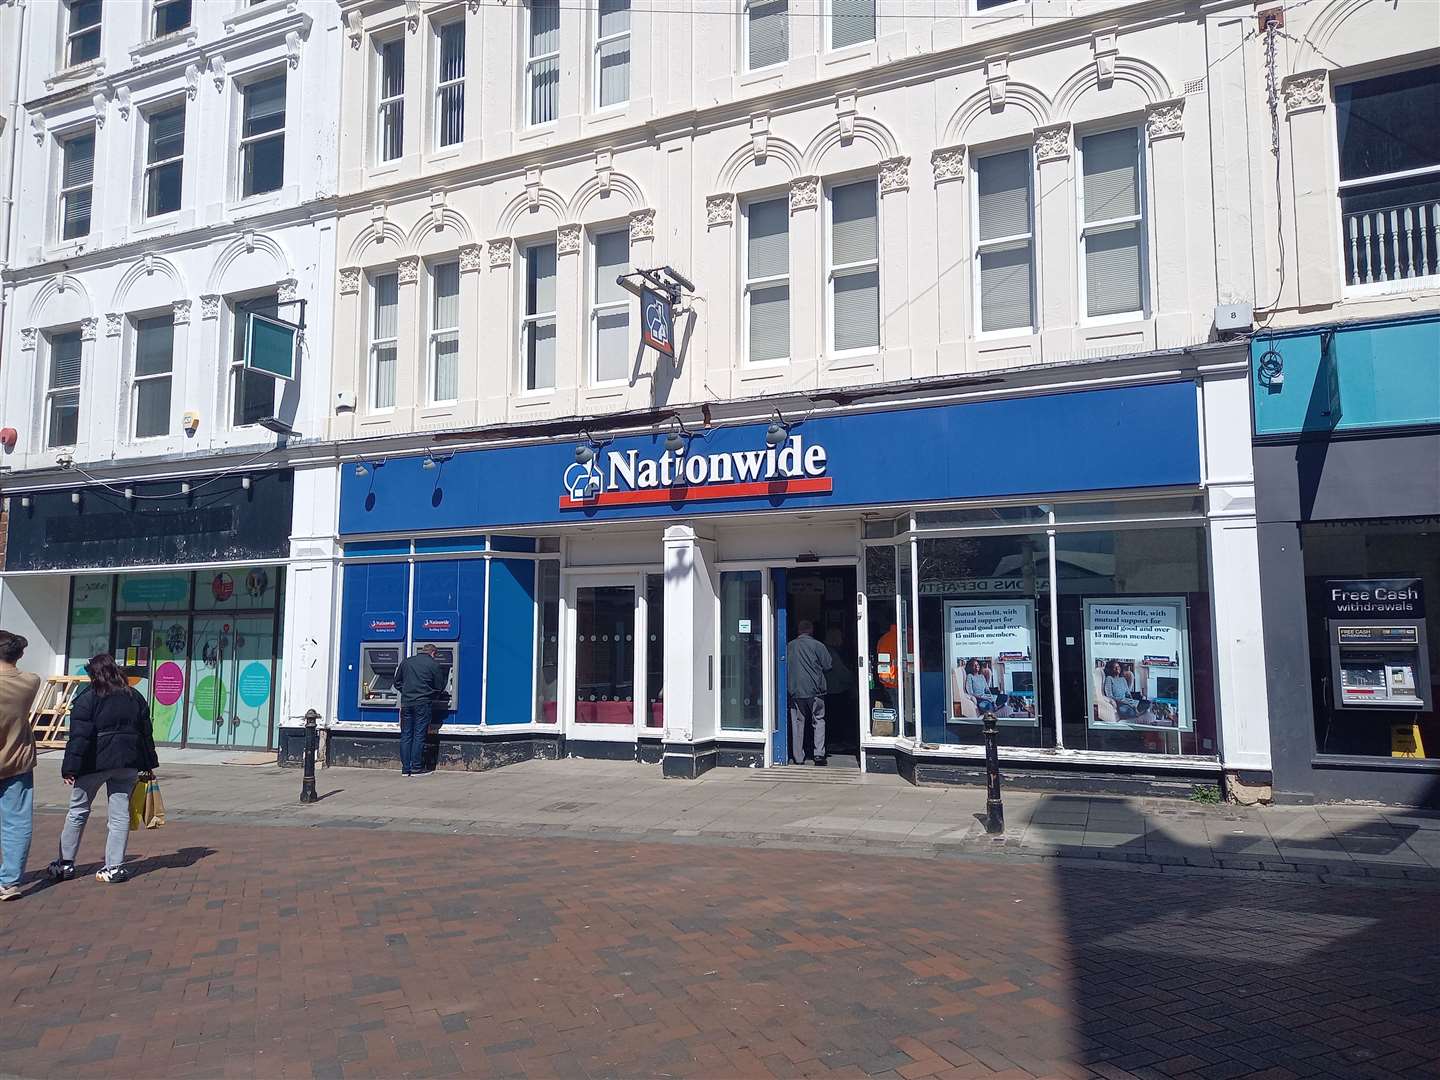 Nationwide's shopfront is considered to be out-of-keeping with the city